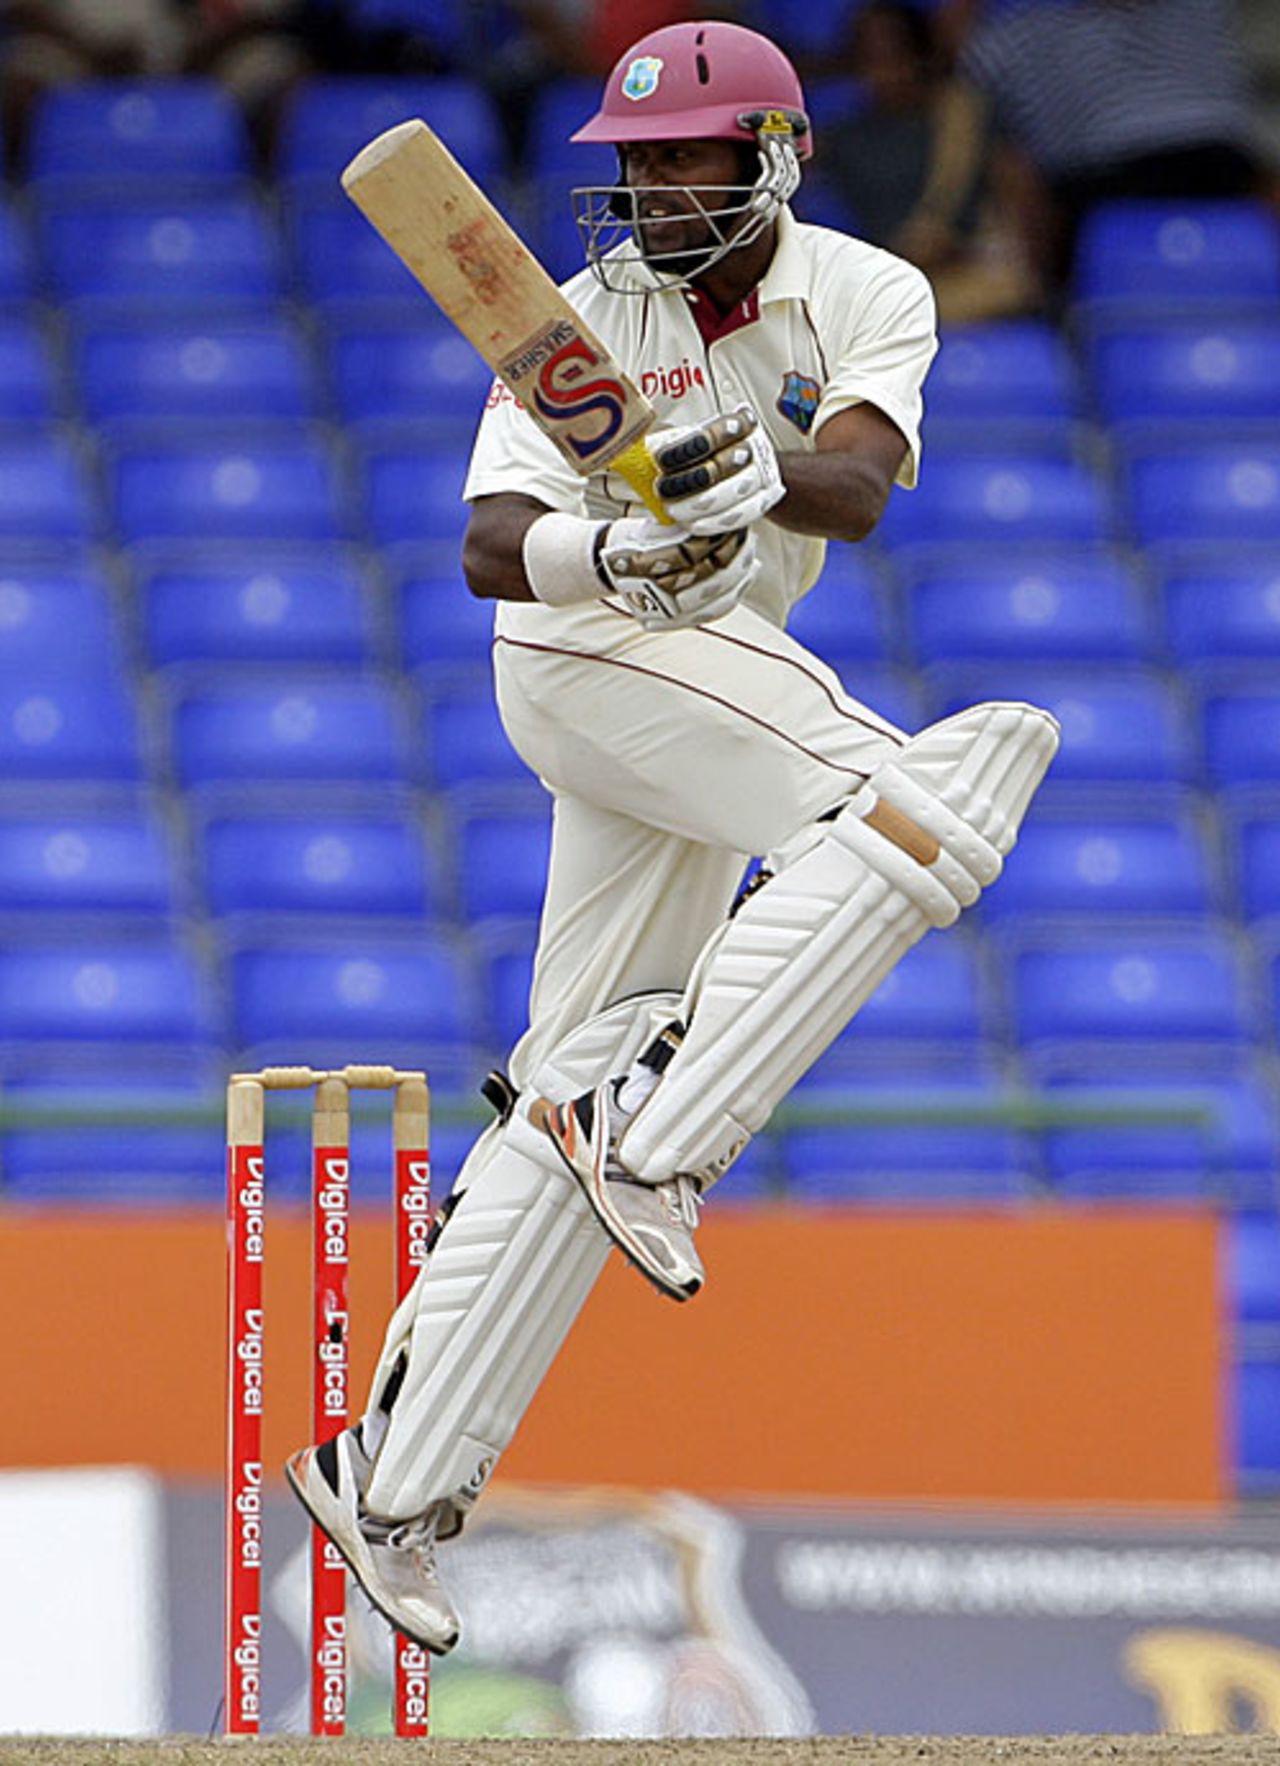 Narsingh Deonarine pulls on one leg, West Indies v South Africa, 2nd Test, St Kitts, 3rd day, June 20, 2010